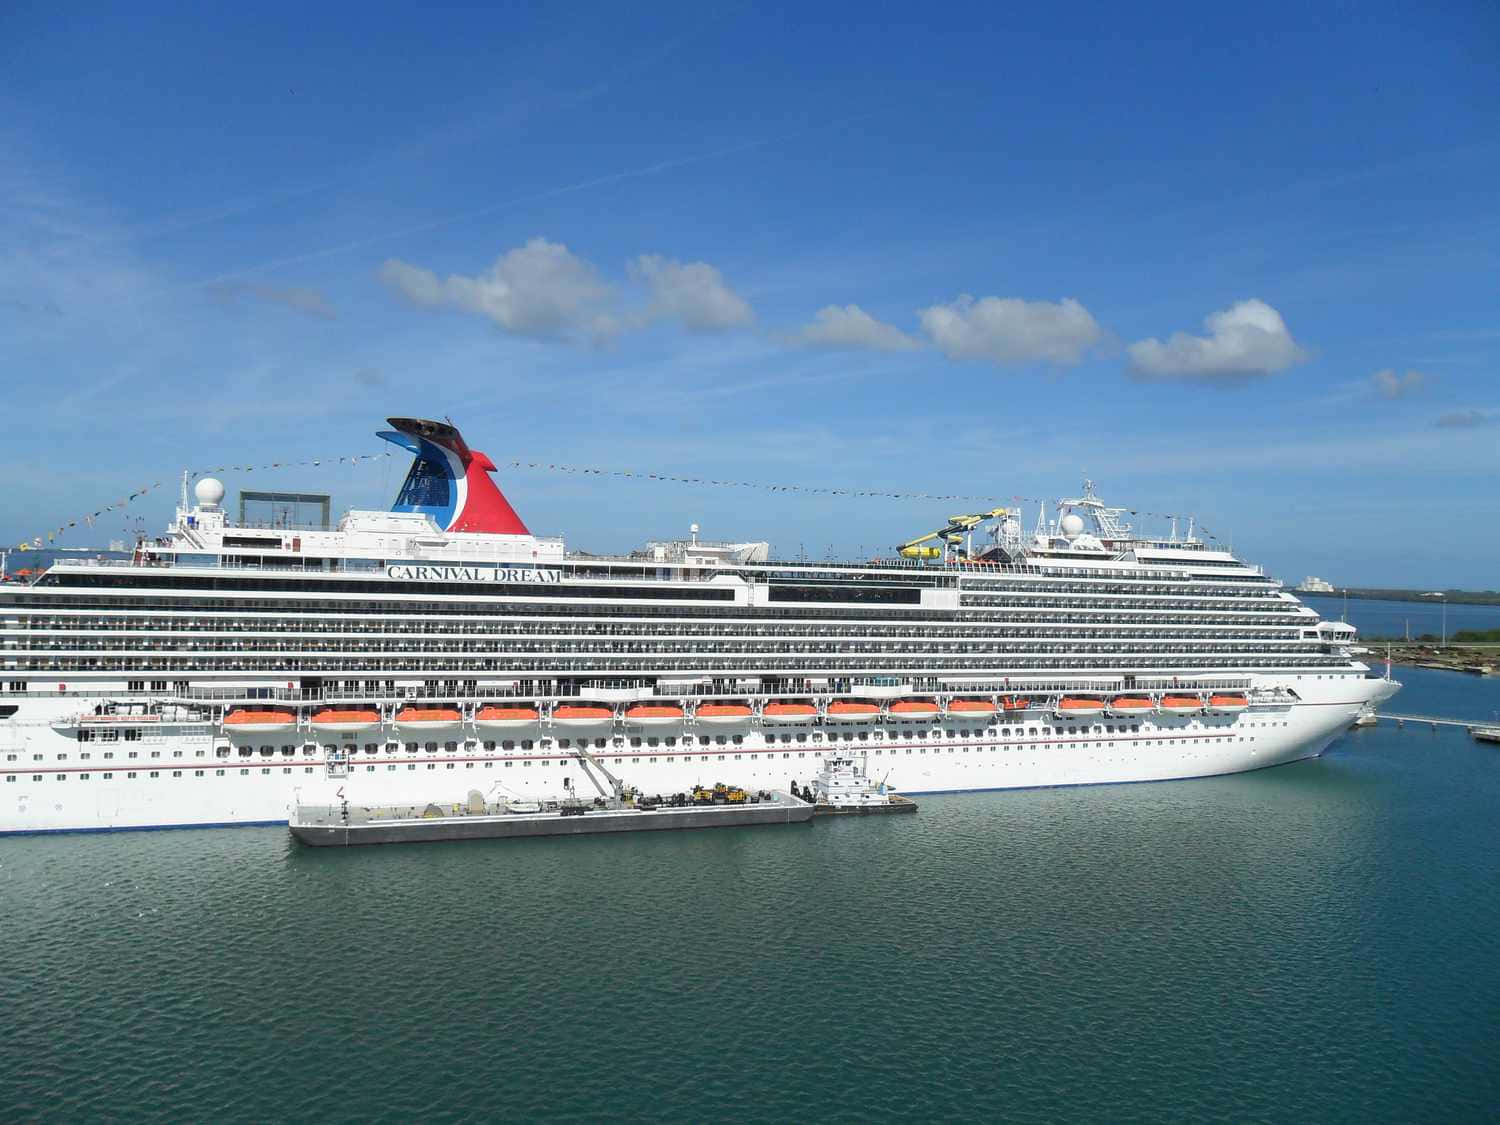 Relax and Unwind on the Carnival Dream